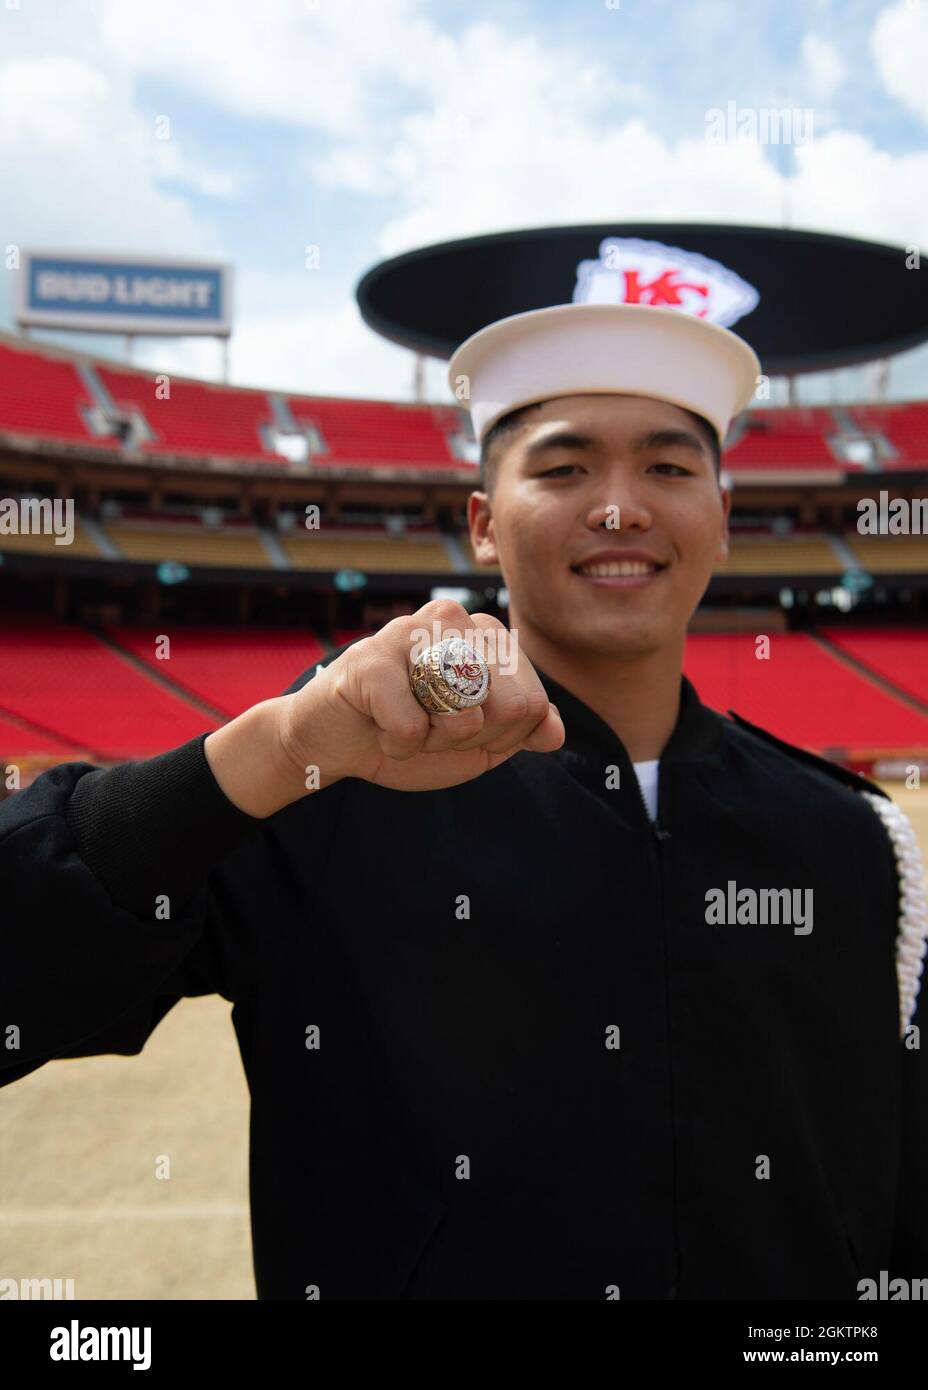 Aviation Structural Mechanic 3rd Class Ken Sachio Boctot, assigned to U.S. Navy Ceremonial Guard “Drill Team Platoon”, poses for a photo with a Kansas City Chiefs Super Bowl ring during a tour of Government Employees Health Association Field at Arrowhead Stadium in Kansas City, Missouri July 1, 2021. GEHA Field at Arrowhead Stadium is home to the Kansas City Chiefs NFL team. The event was part of Kansas City Navy Week, the first in-person Navy Week since the beginning of the COVID-19 pandemic, bringing Sailors from different Navy units across the U.S. to conduct focused outreach with members o Stock Photo